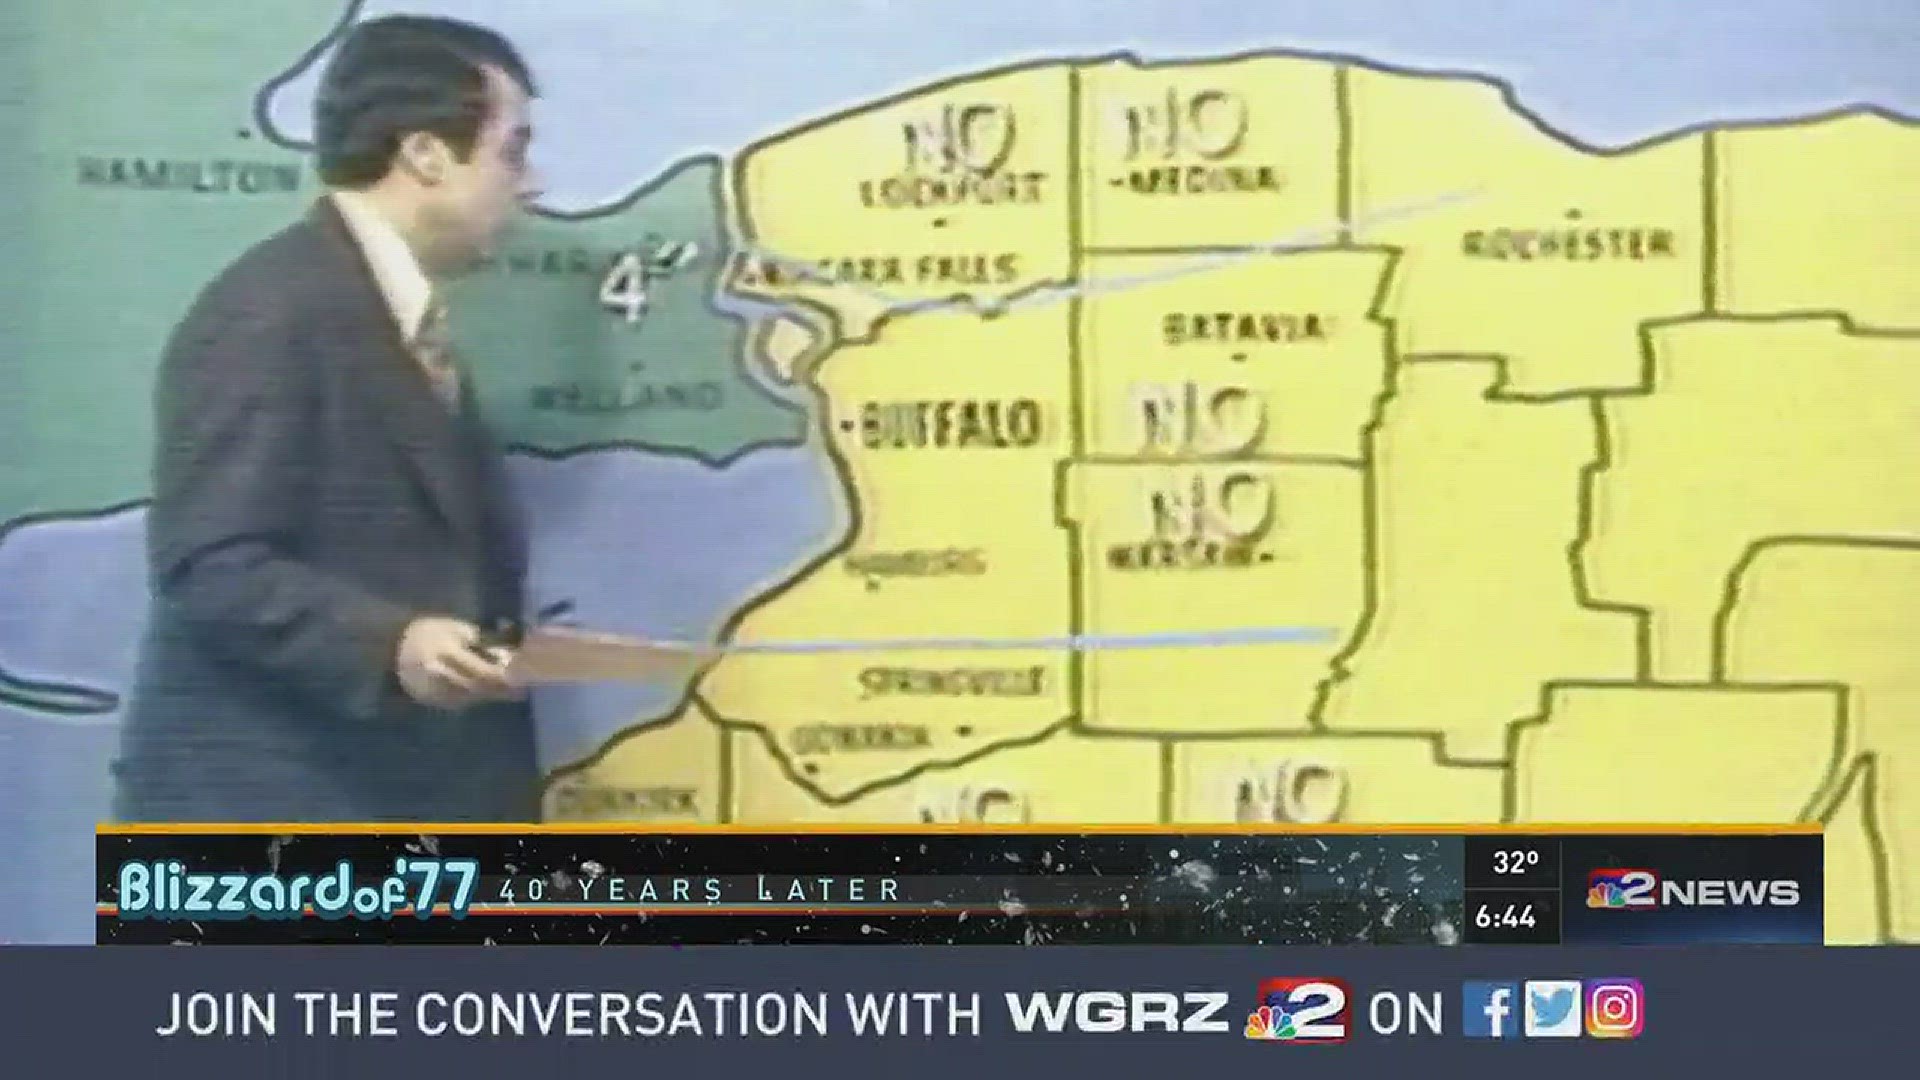 2017 marks the 40th Anniversary of the Blizzard of '77. Daybreak begins taking a look back to that fateful storm. Former WGRZ Meteorologist, Barry Lillis looks back on his memories of the storm, and the Channel 2 coverage of the blizzard.